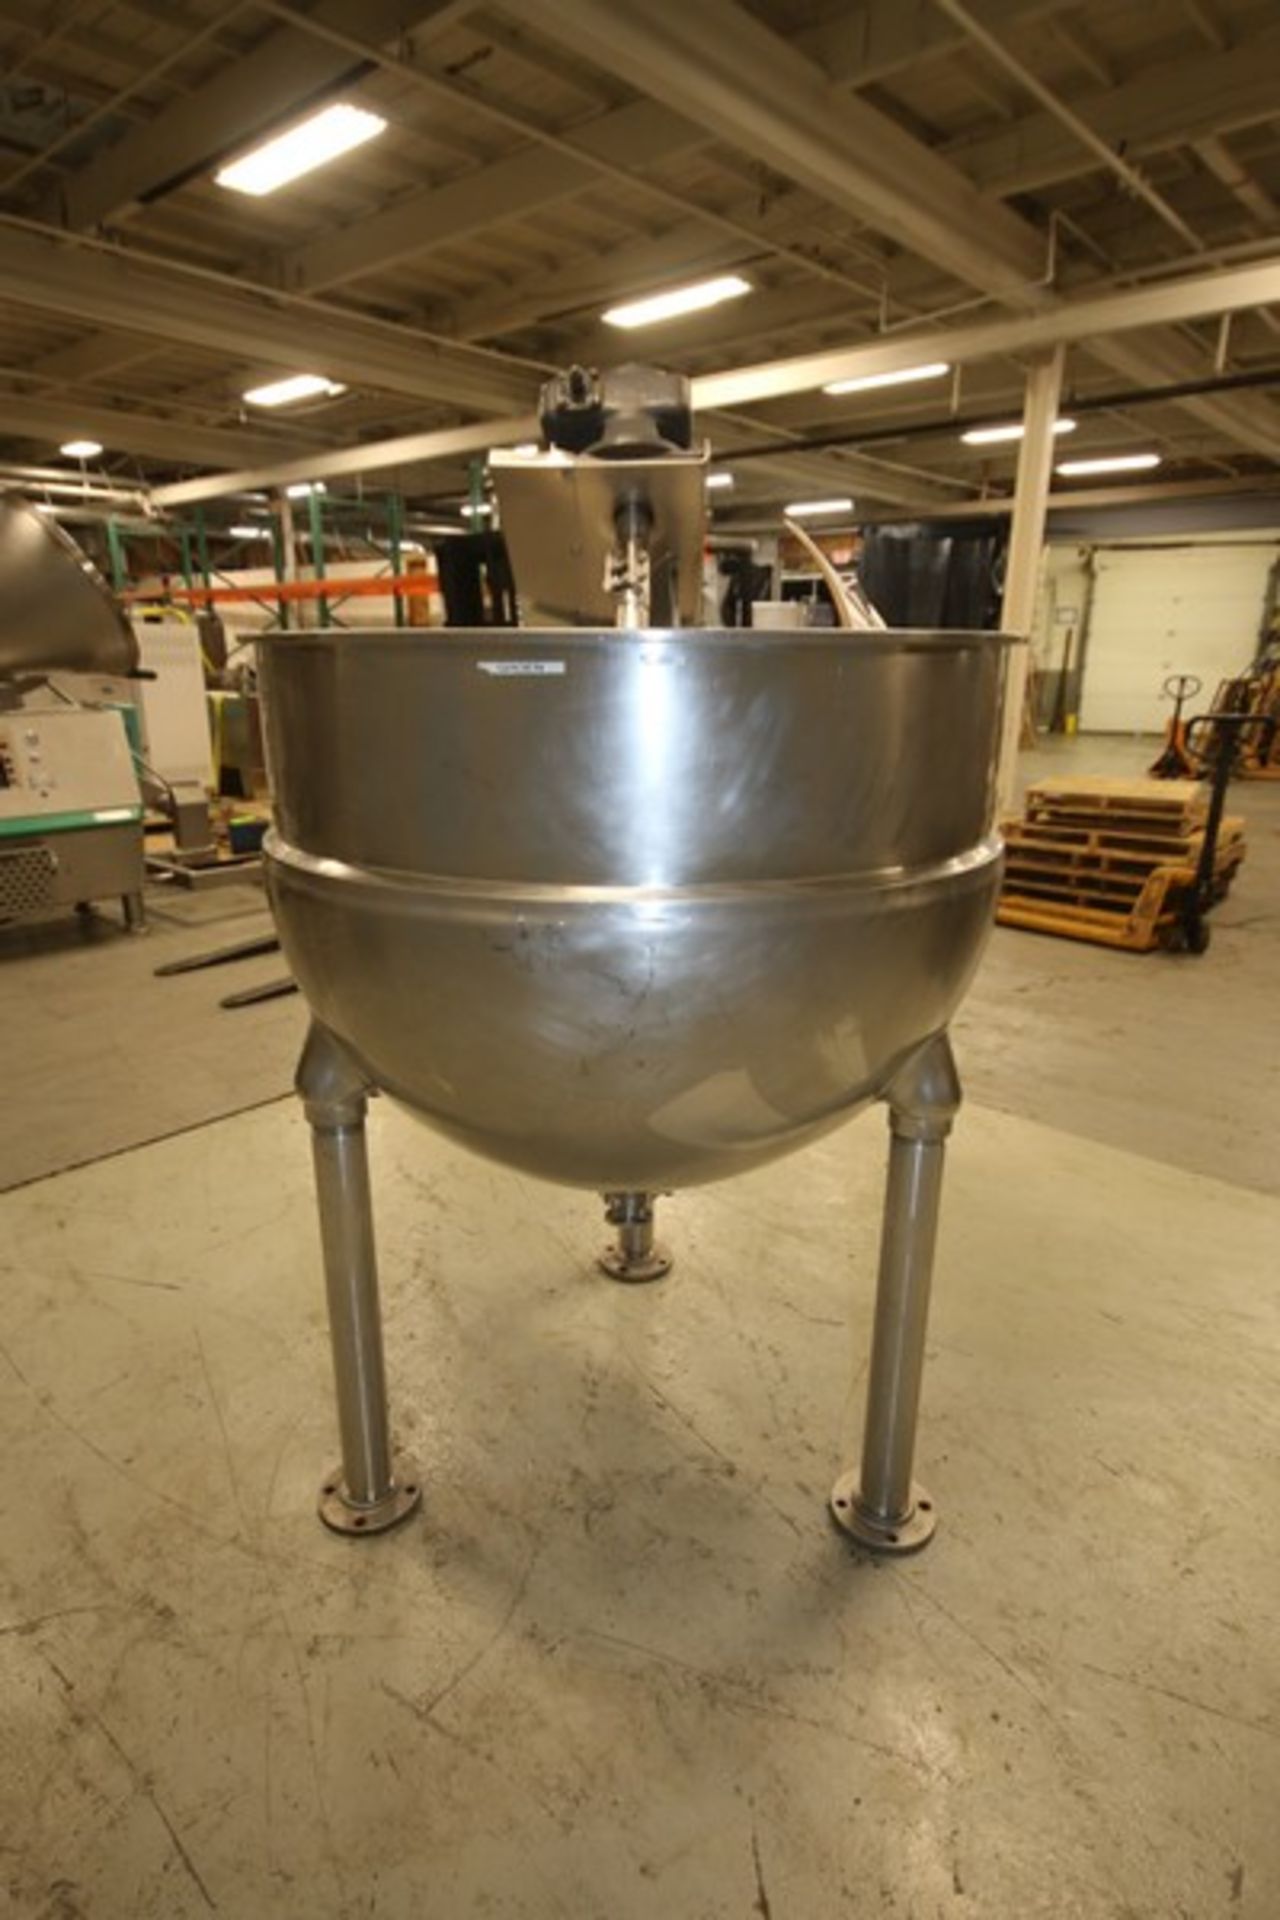 Groen 200 Gal. S/S Jacketed Kettle, Model INA / 2-200, SN 1978, BN 88764, with Scrape Surface Off-